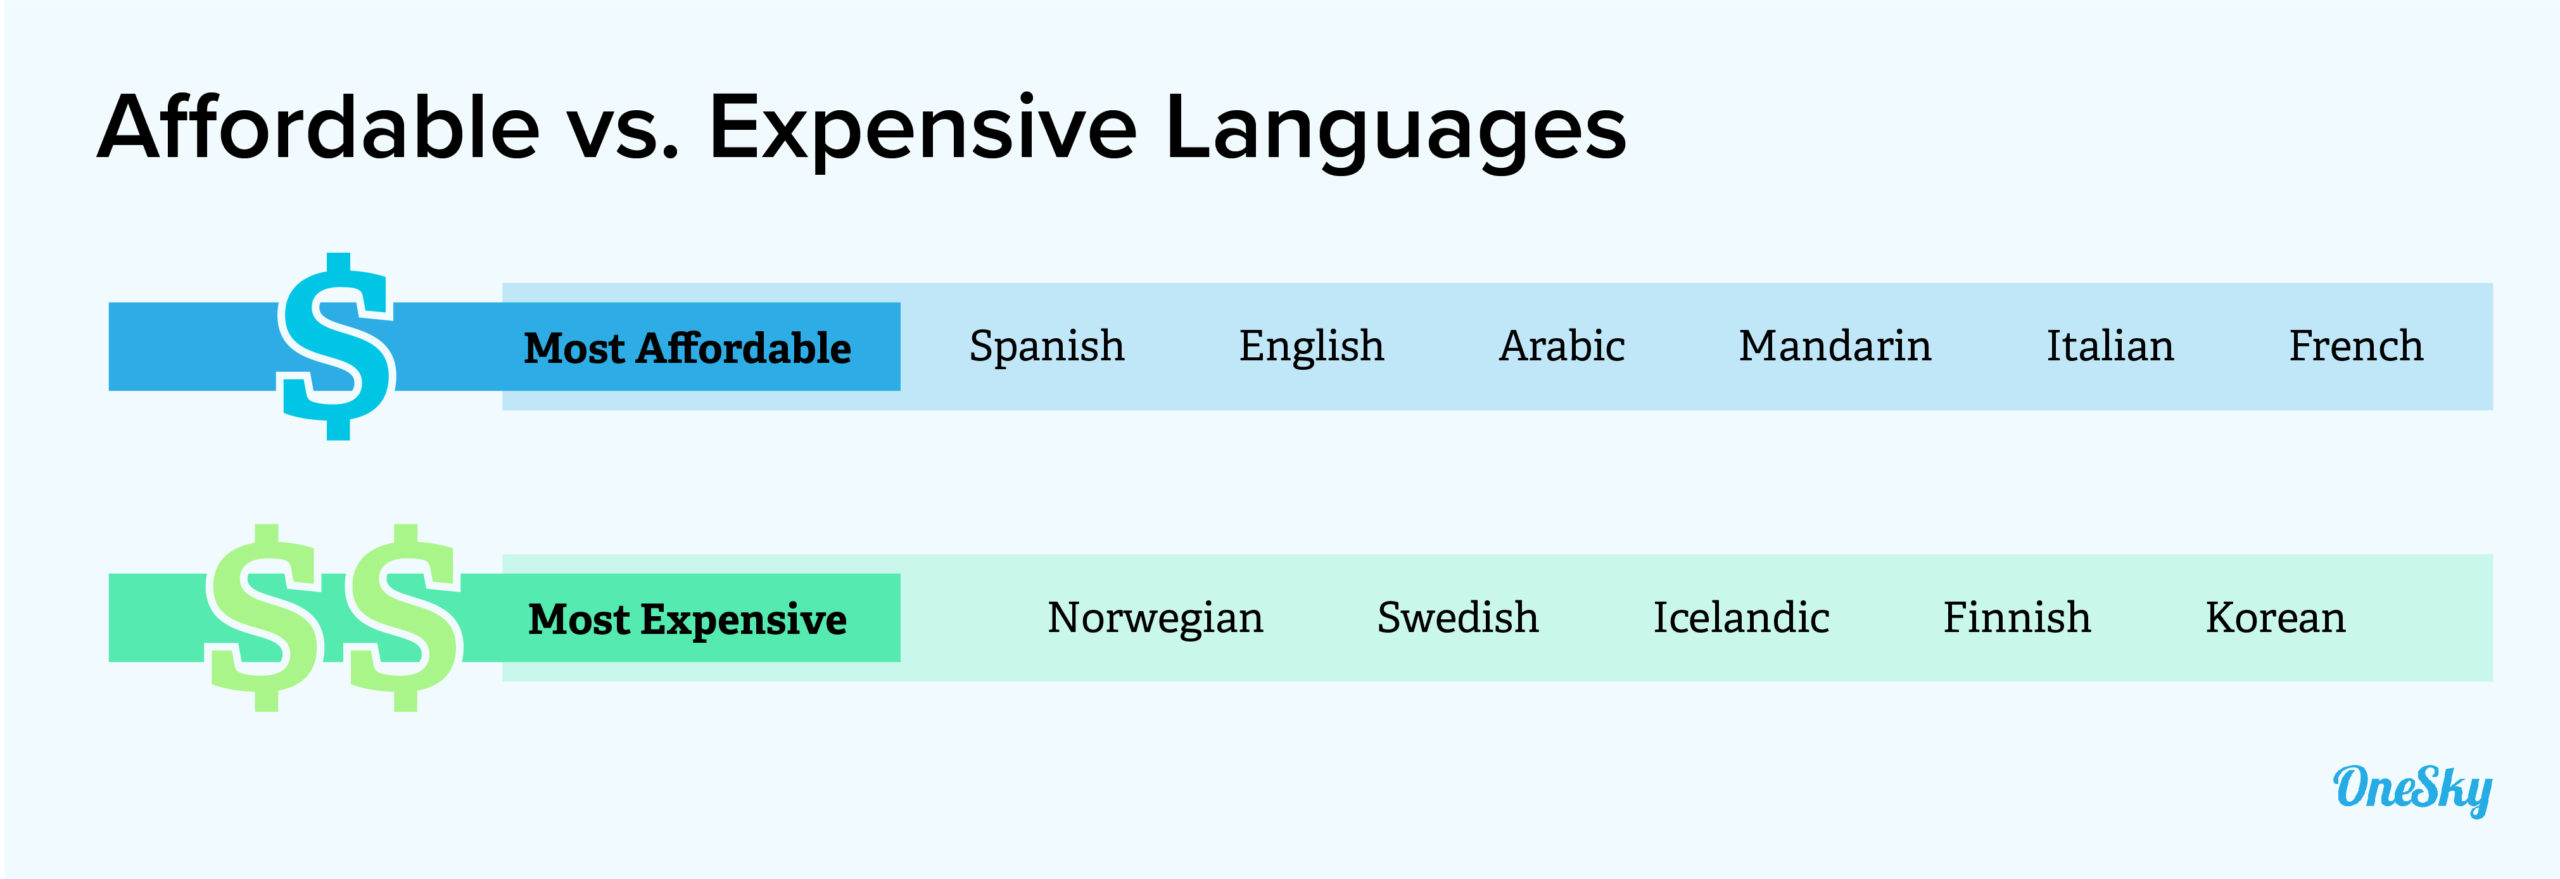 affordable vs expensive languages